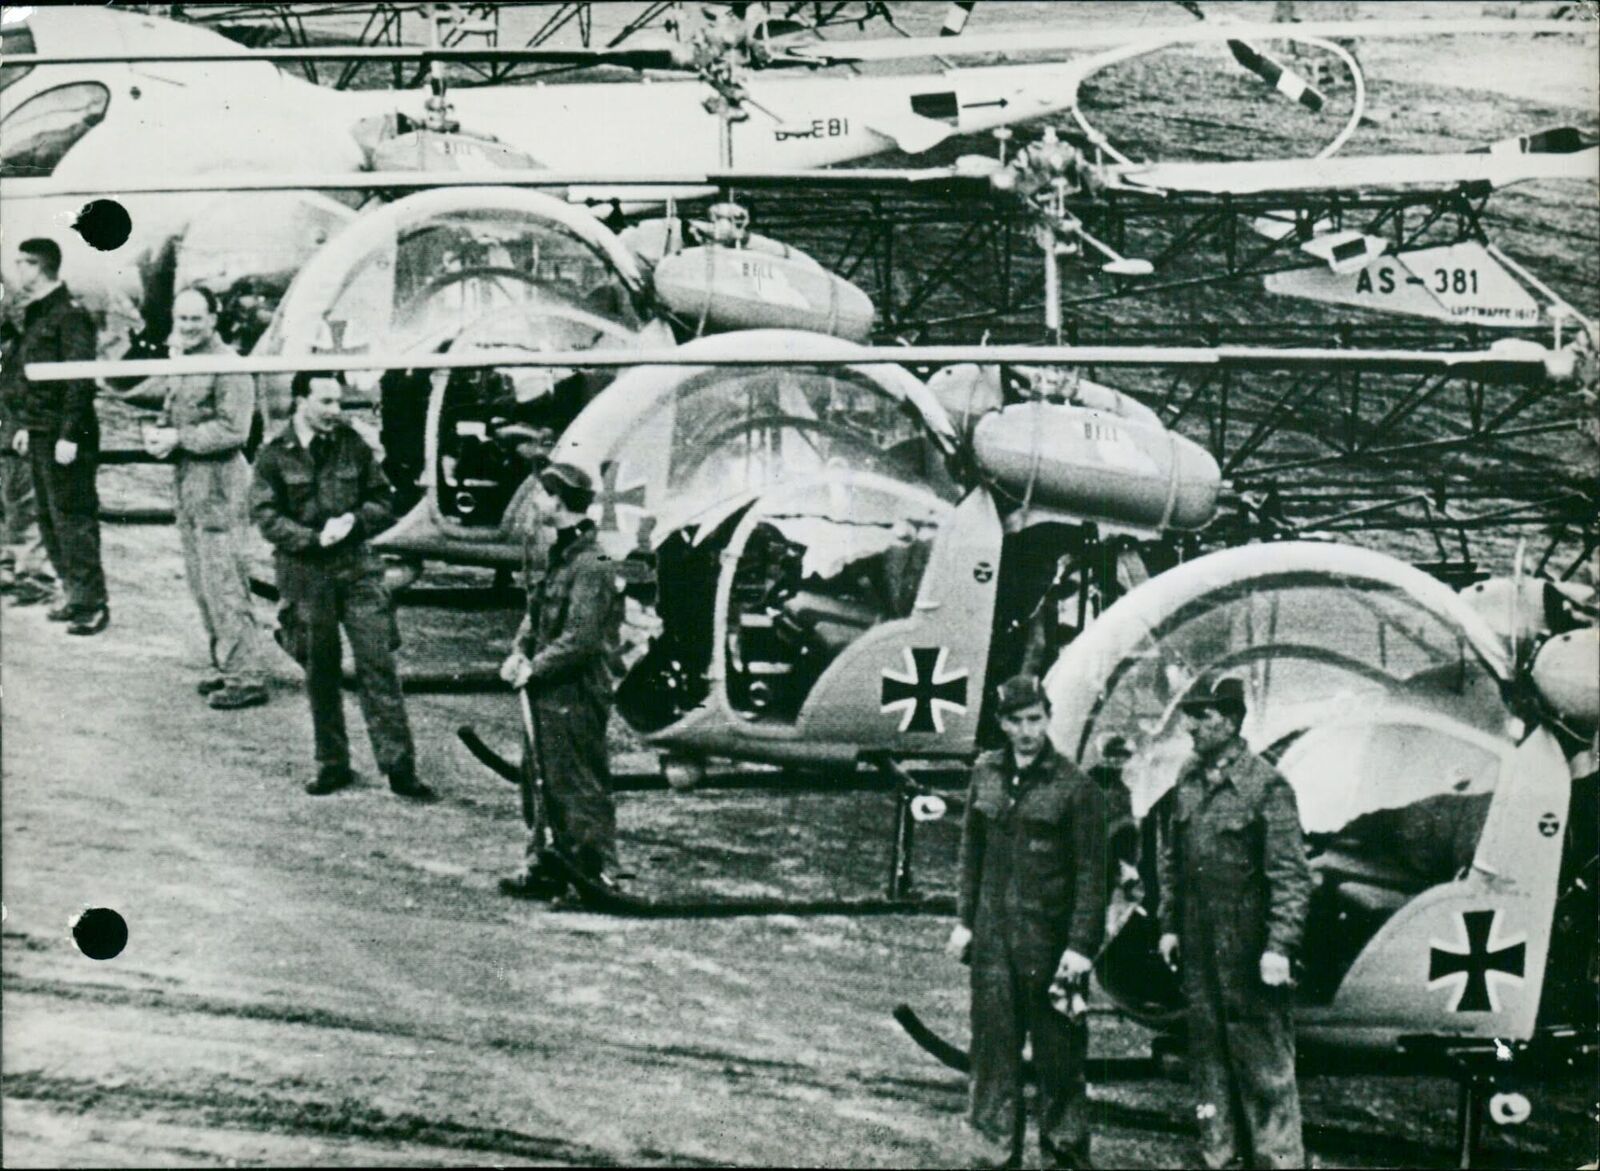 Handover of 4 American helicopters to new Germa... - Vintage Photograph 3439473